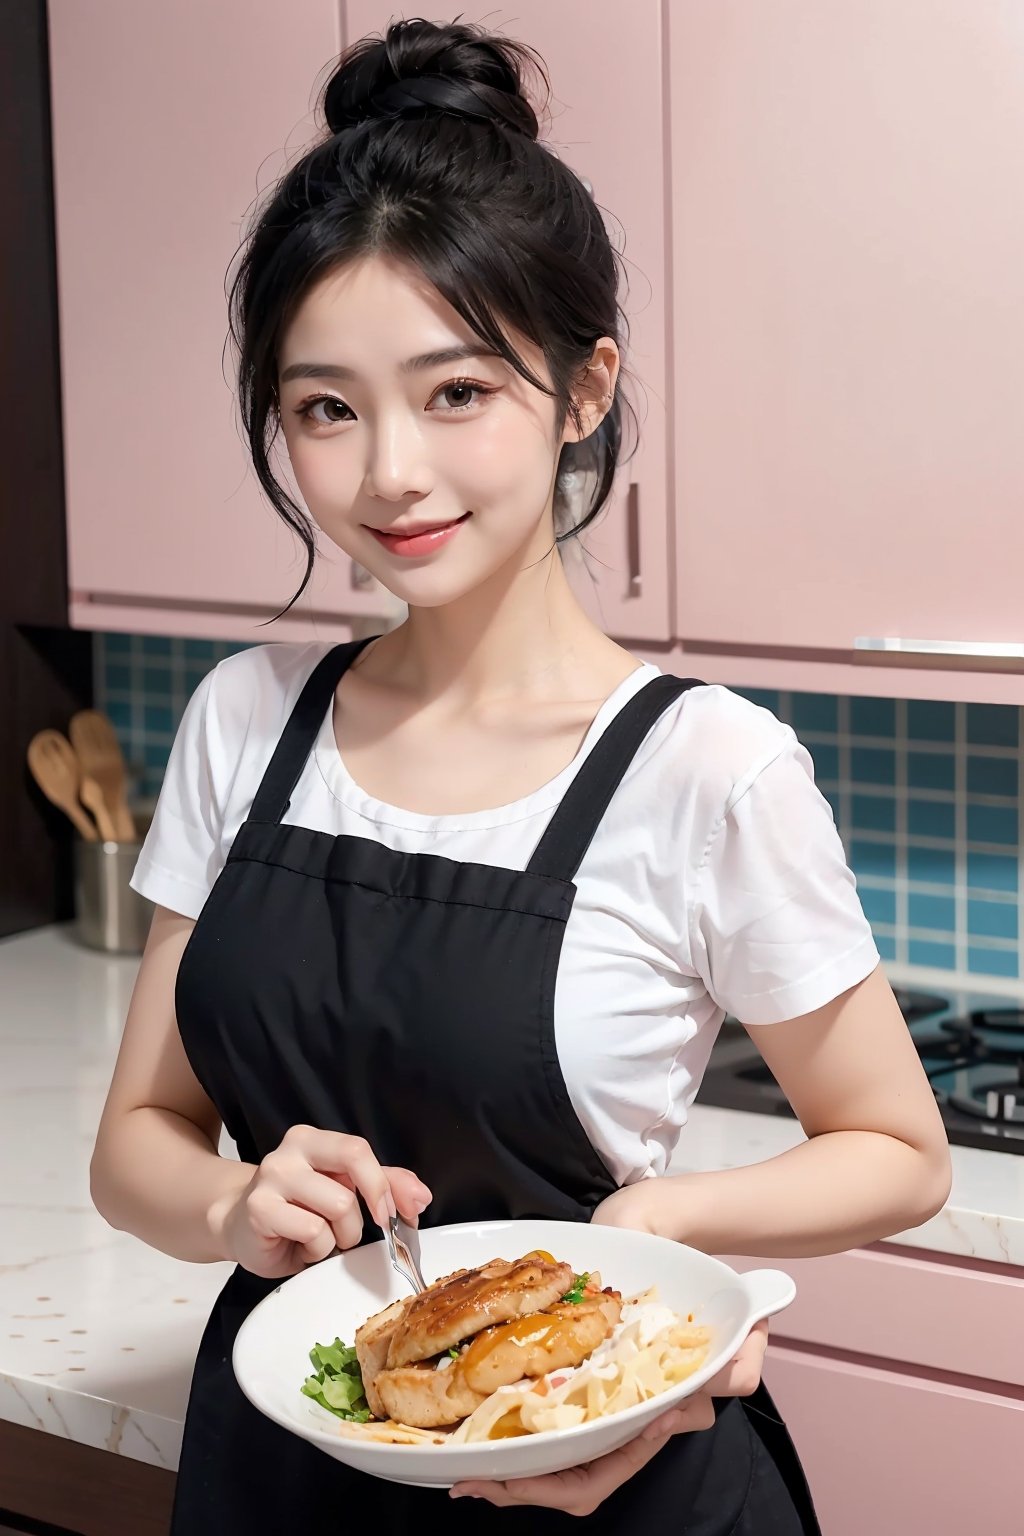 beautiful, 1girl,
(Black hair:1.2), hair tied up into a bun
smile, blue T-shirt under pink apron, hk_girl, holding a big delicious meal dish with both hands, kitchen background, wife, waifu,blurred background